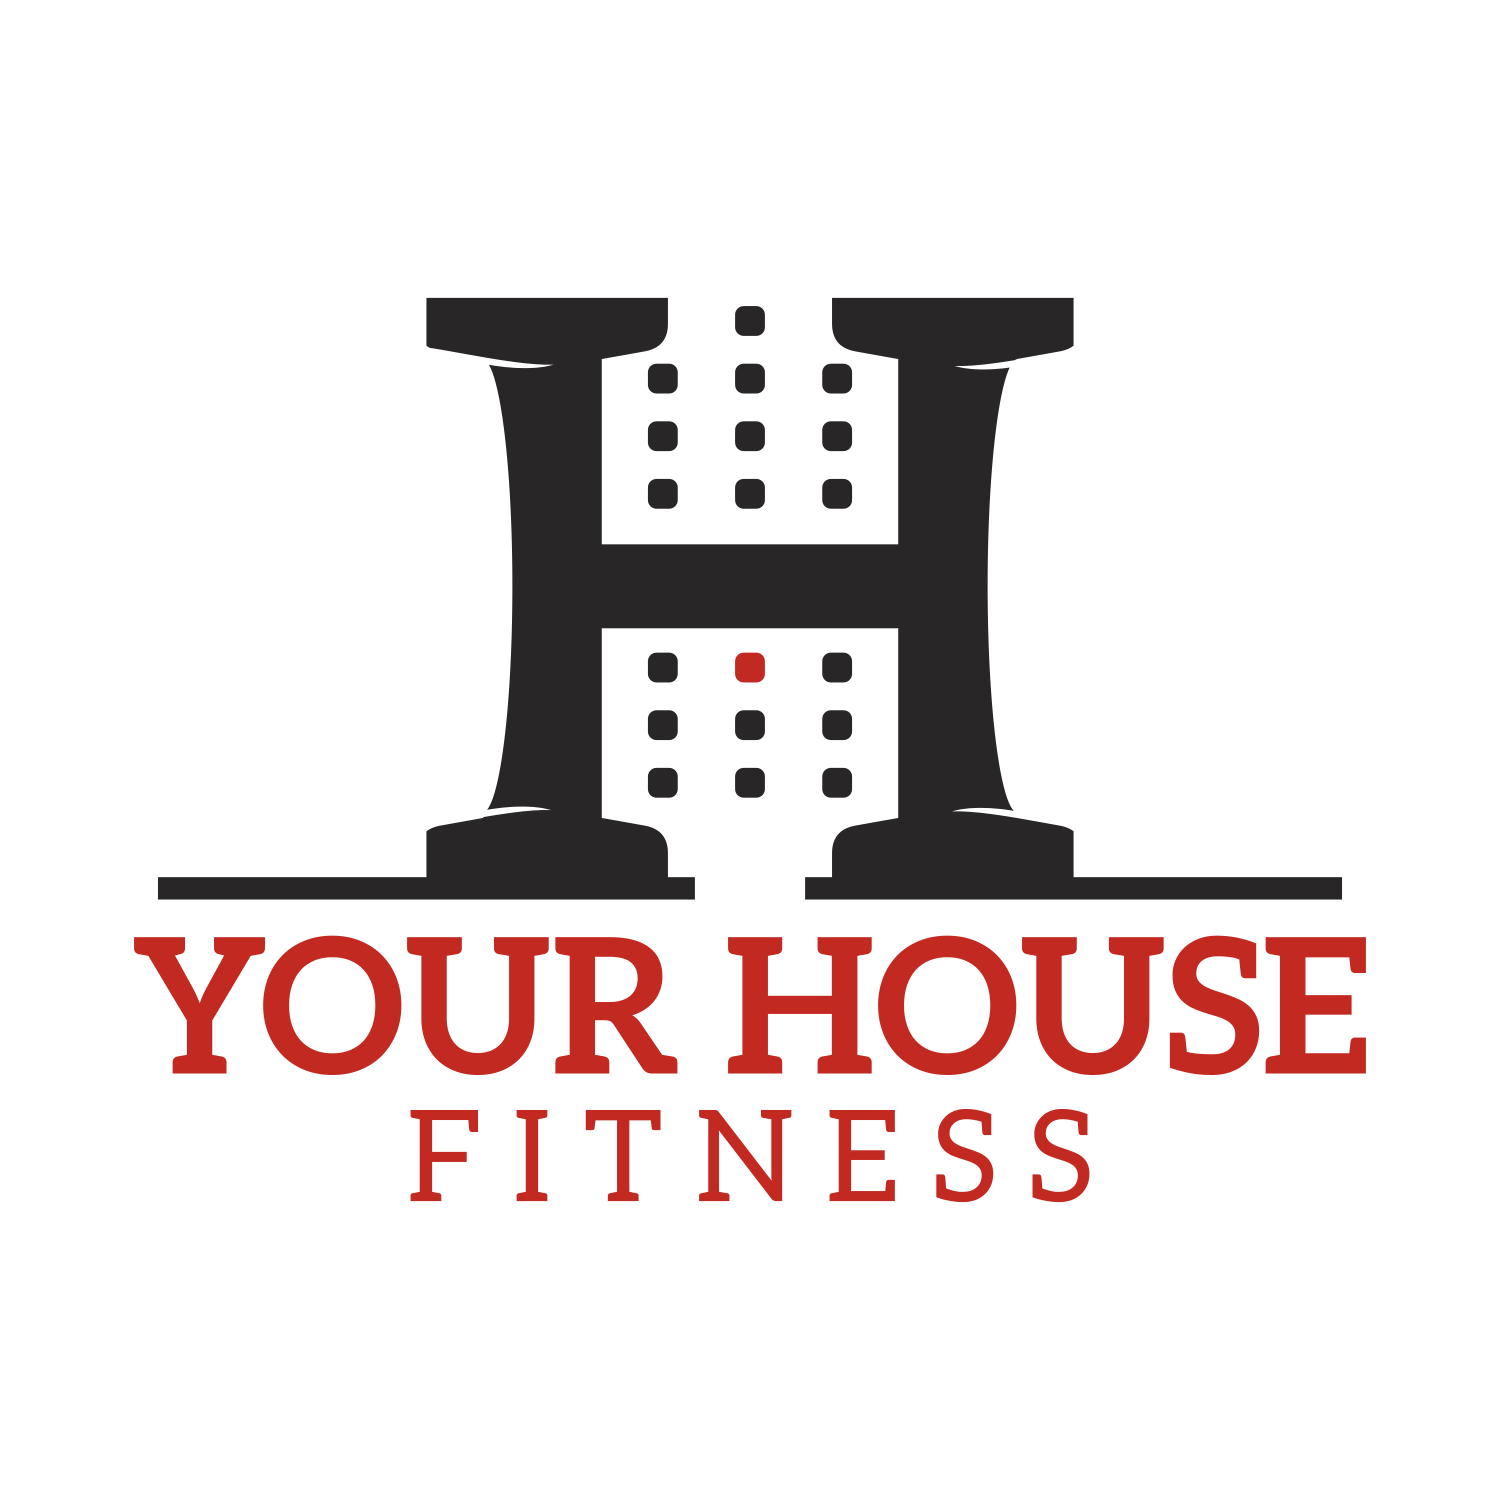 Your House Fitness - Personal Training Toronto